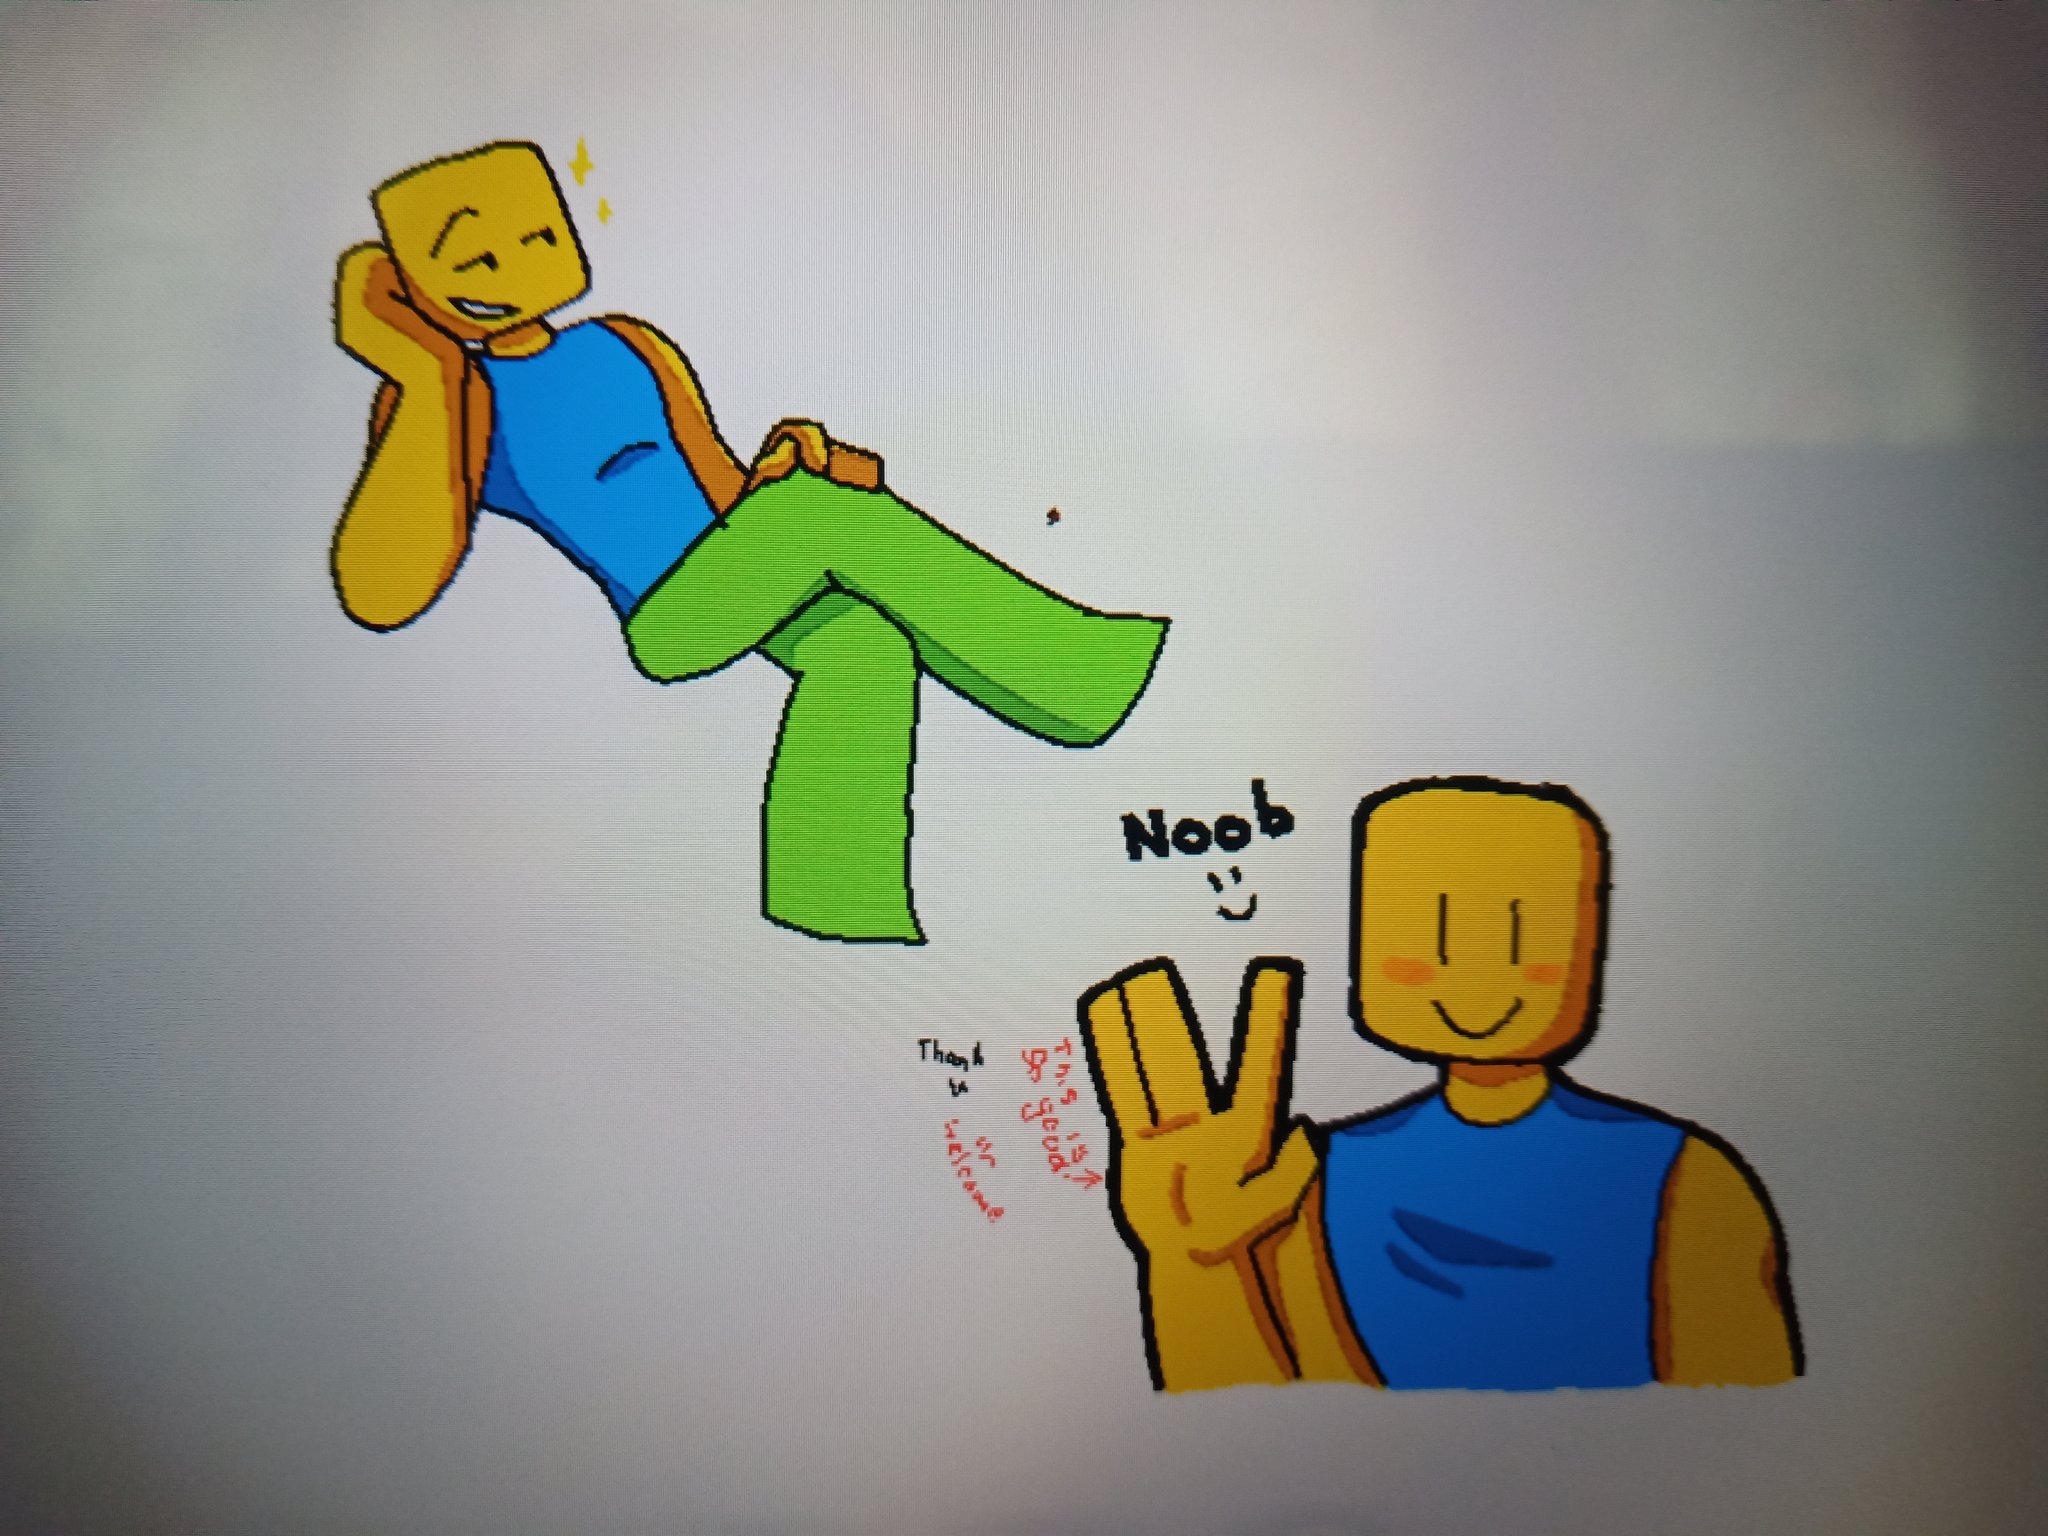 Decided to do a drawing for Noob